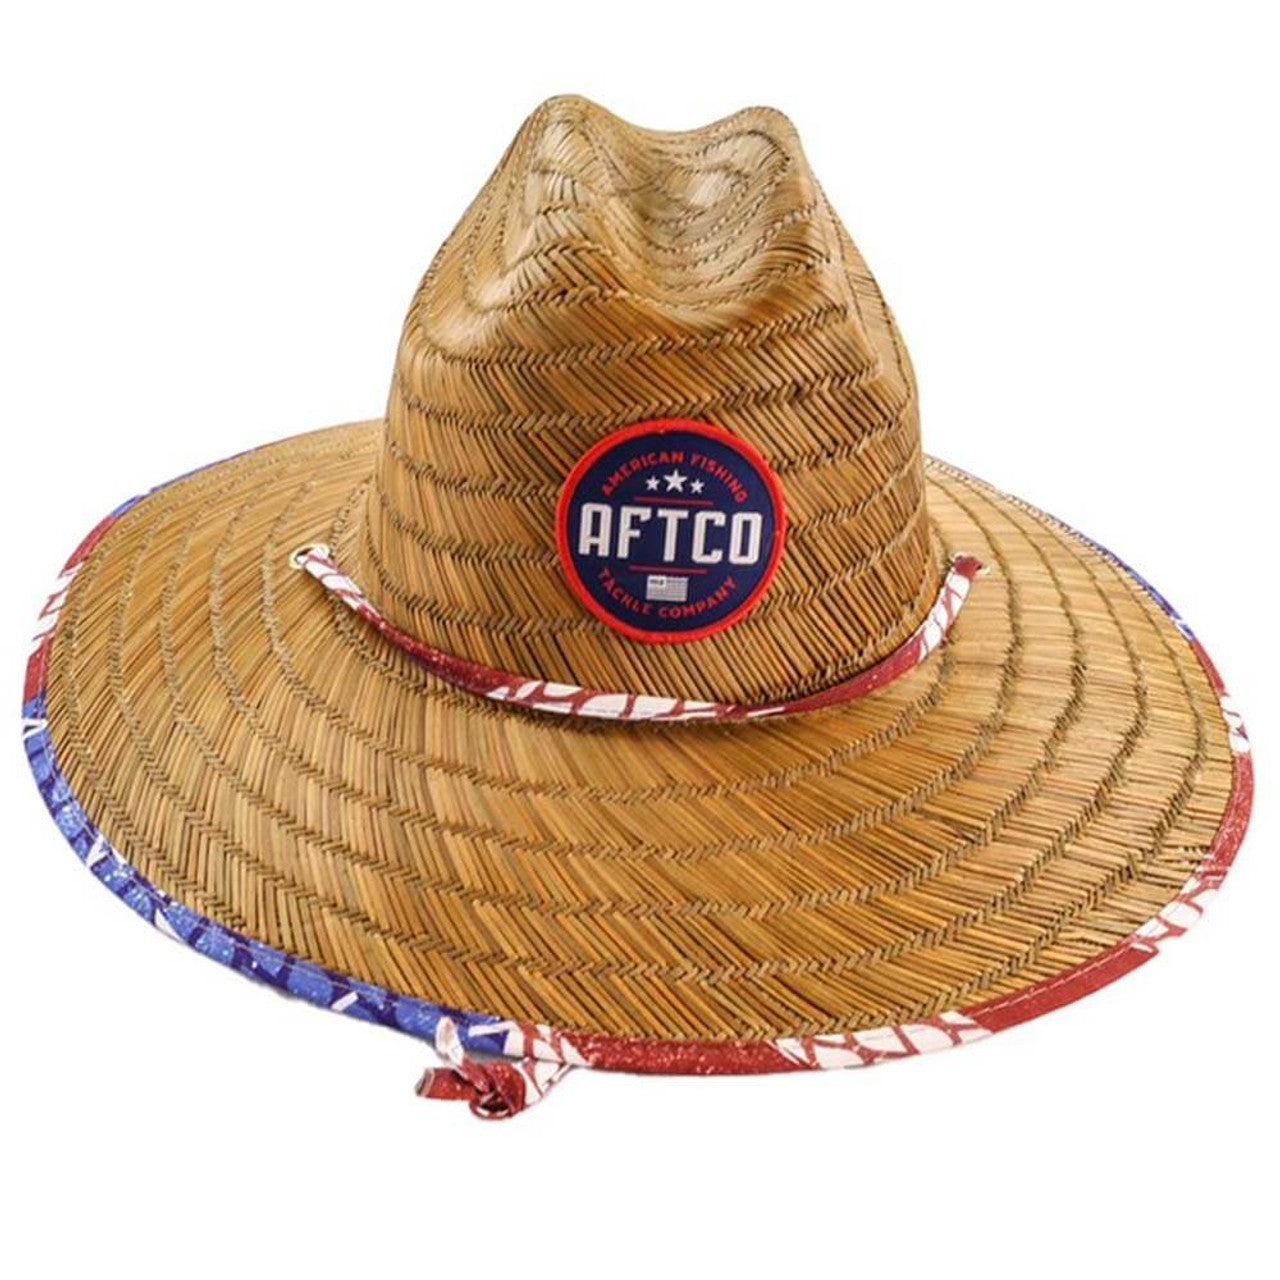 AFTCO BOATBAR STRAW HAT – The Hippie Fish